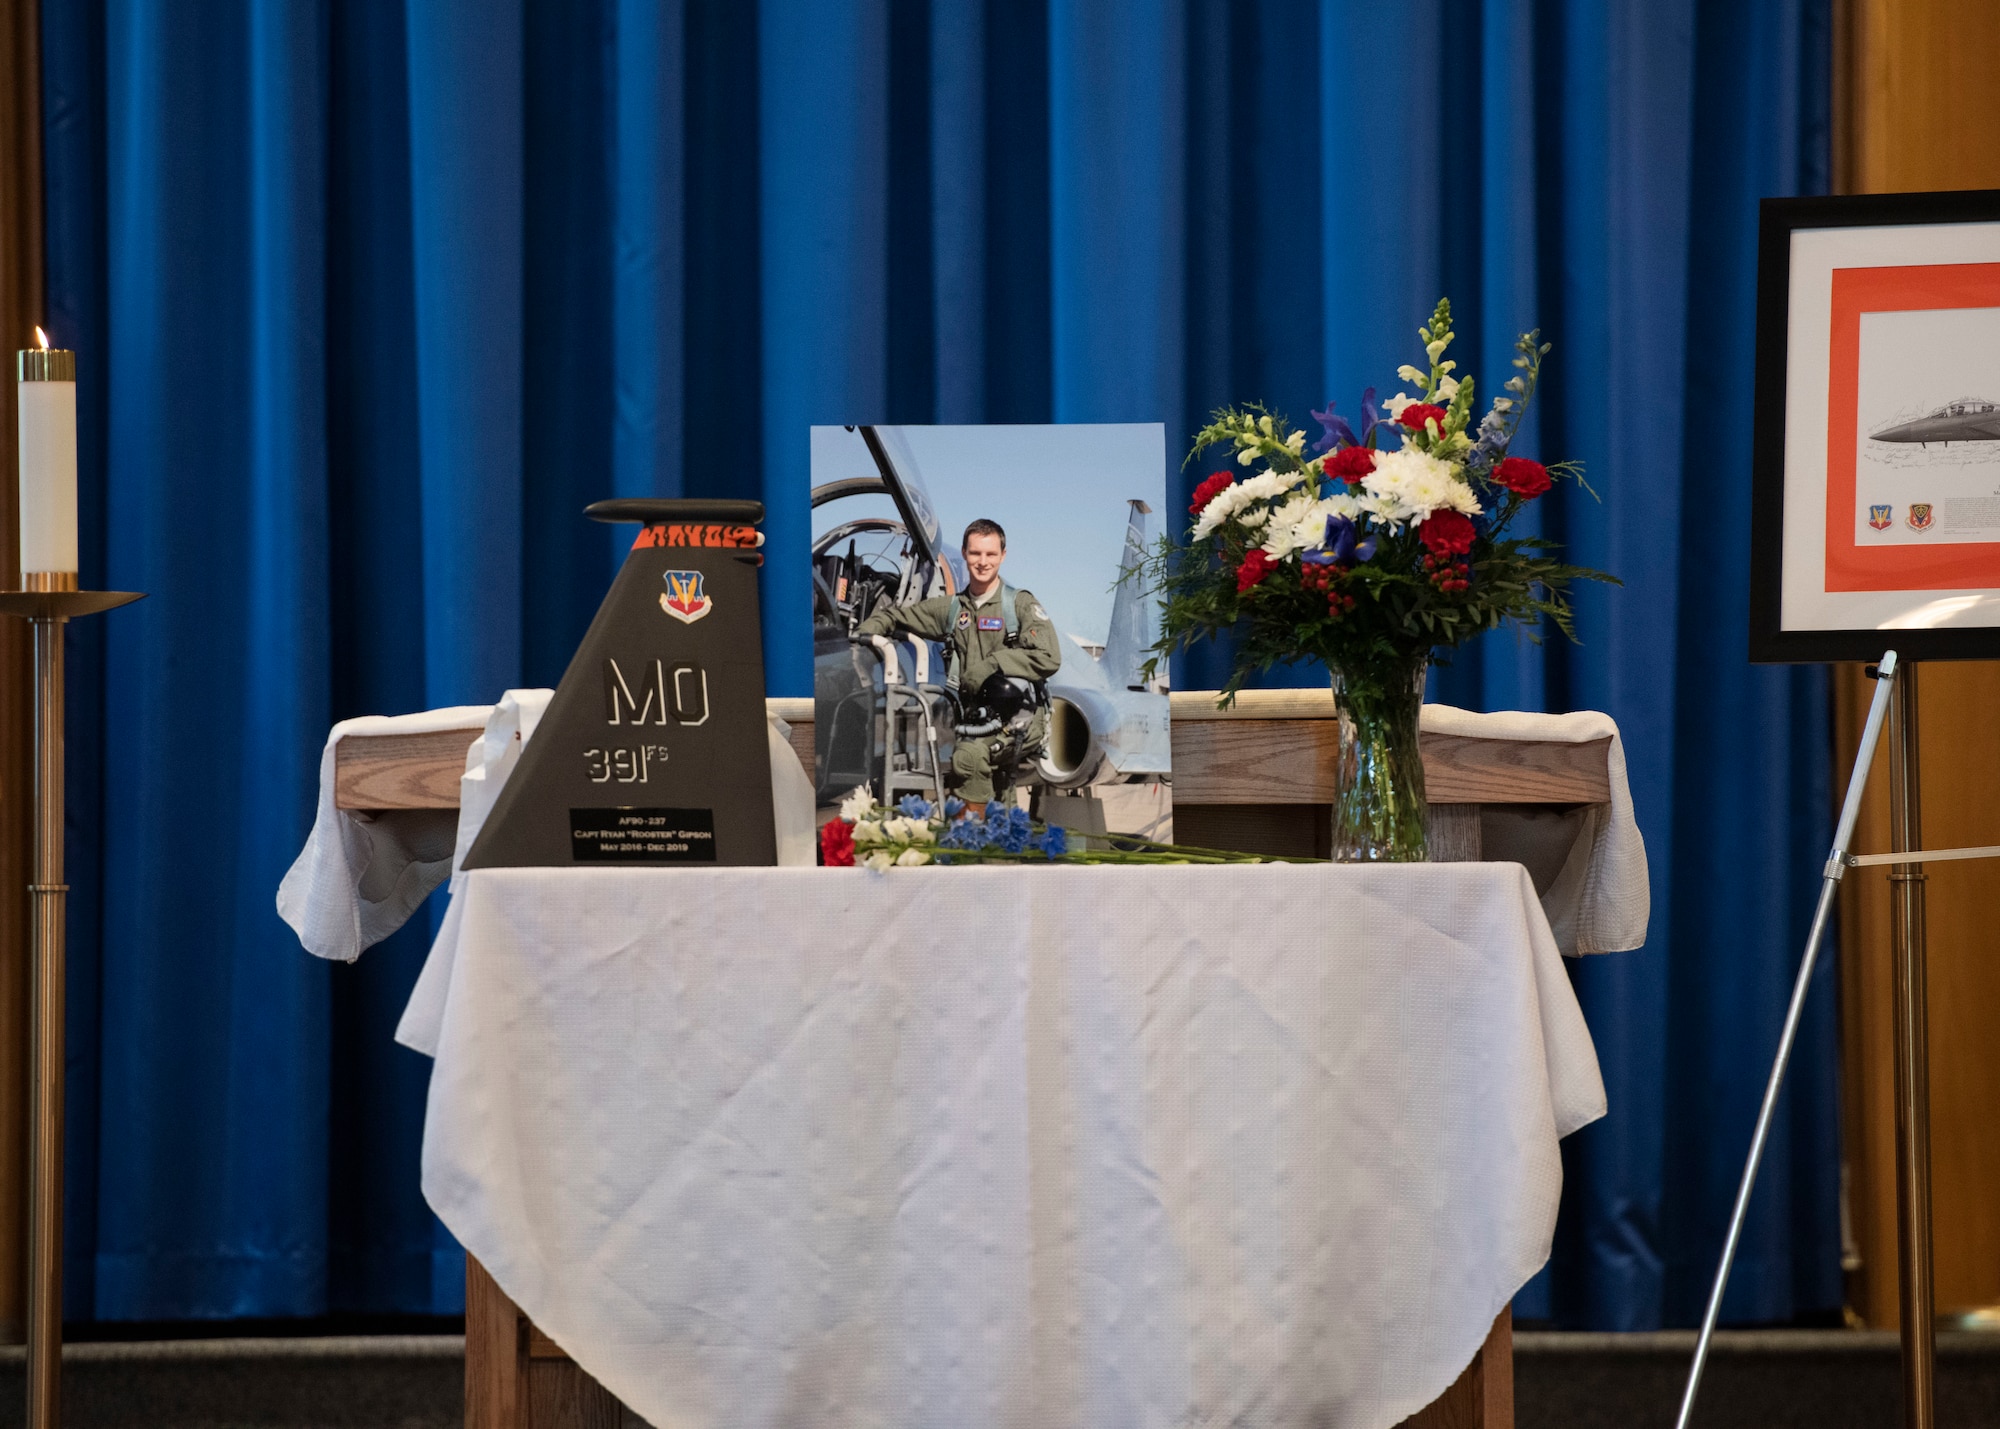 A table is set as a memorial for Capt. Ryan Gipson, 391st Fighter Squadron wing munitions manager, during his memorial ceremony,  Jan. 16, 2020, at Mountain Home Air Force Base, Idaho. This ceremony was held to celebrate the life of Capt. Ryan Gipson and his honorable years of service in the United States Air Force. (U.S. Air Force photo by Senior Airman Tyrell Hall)